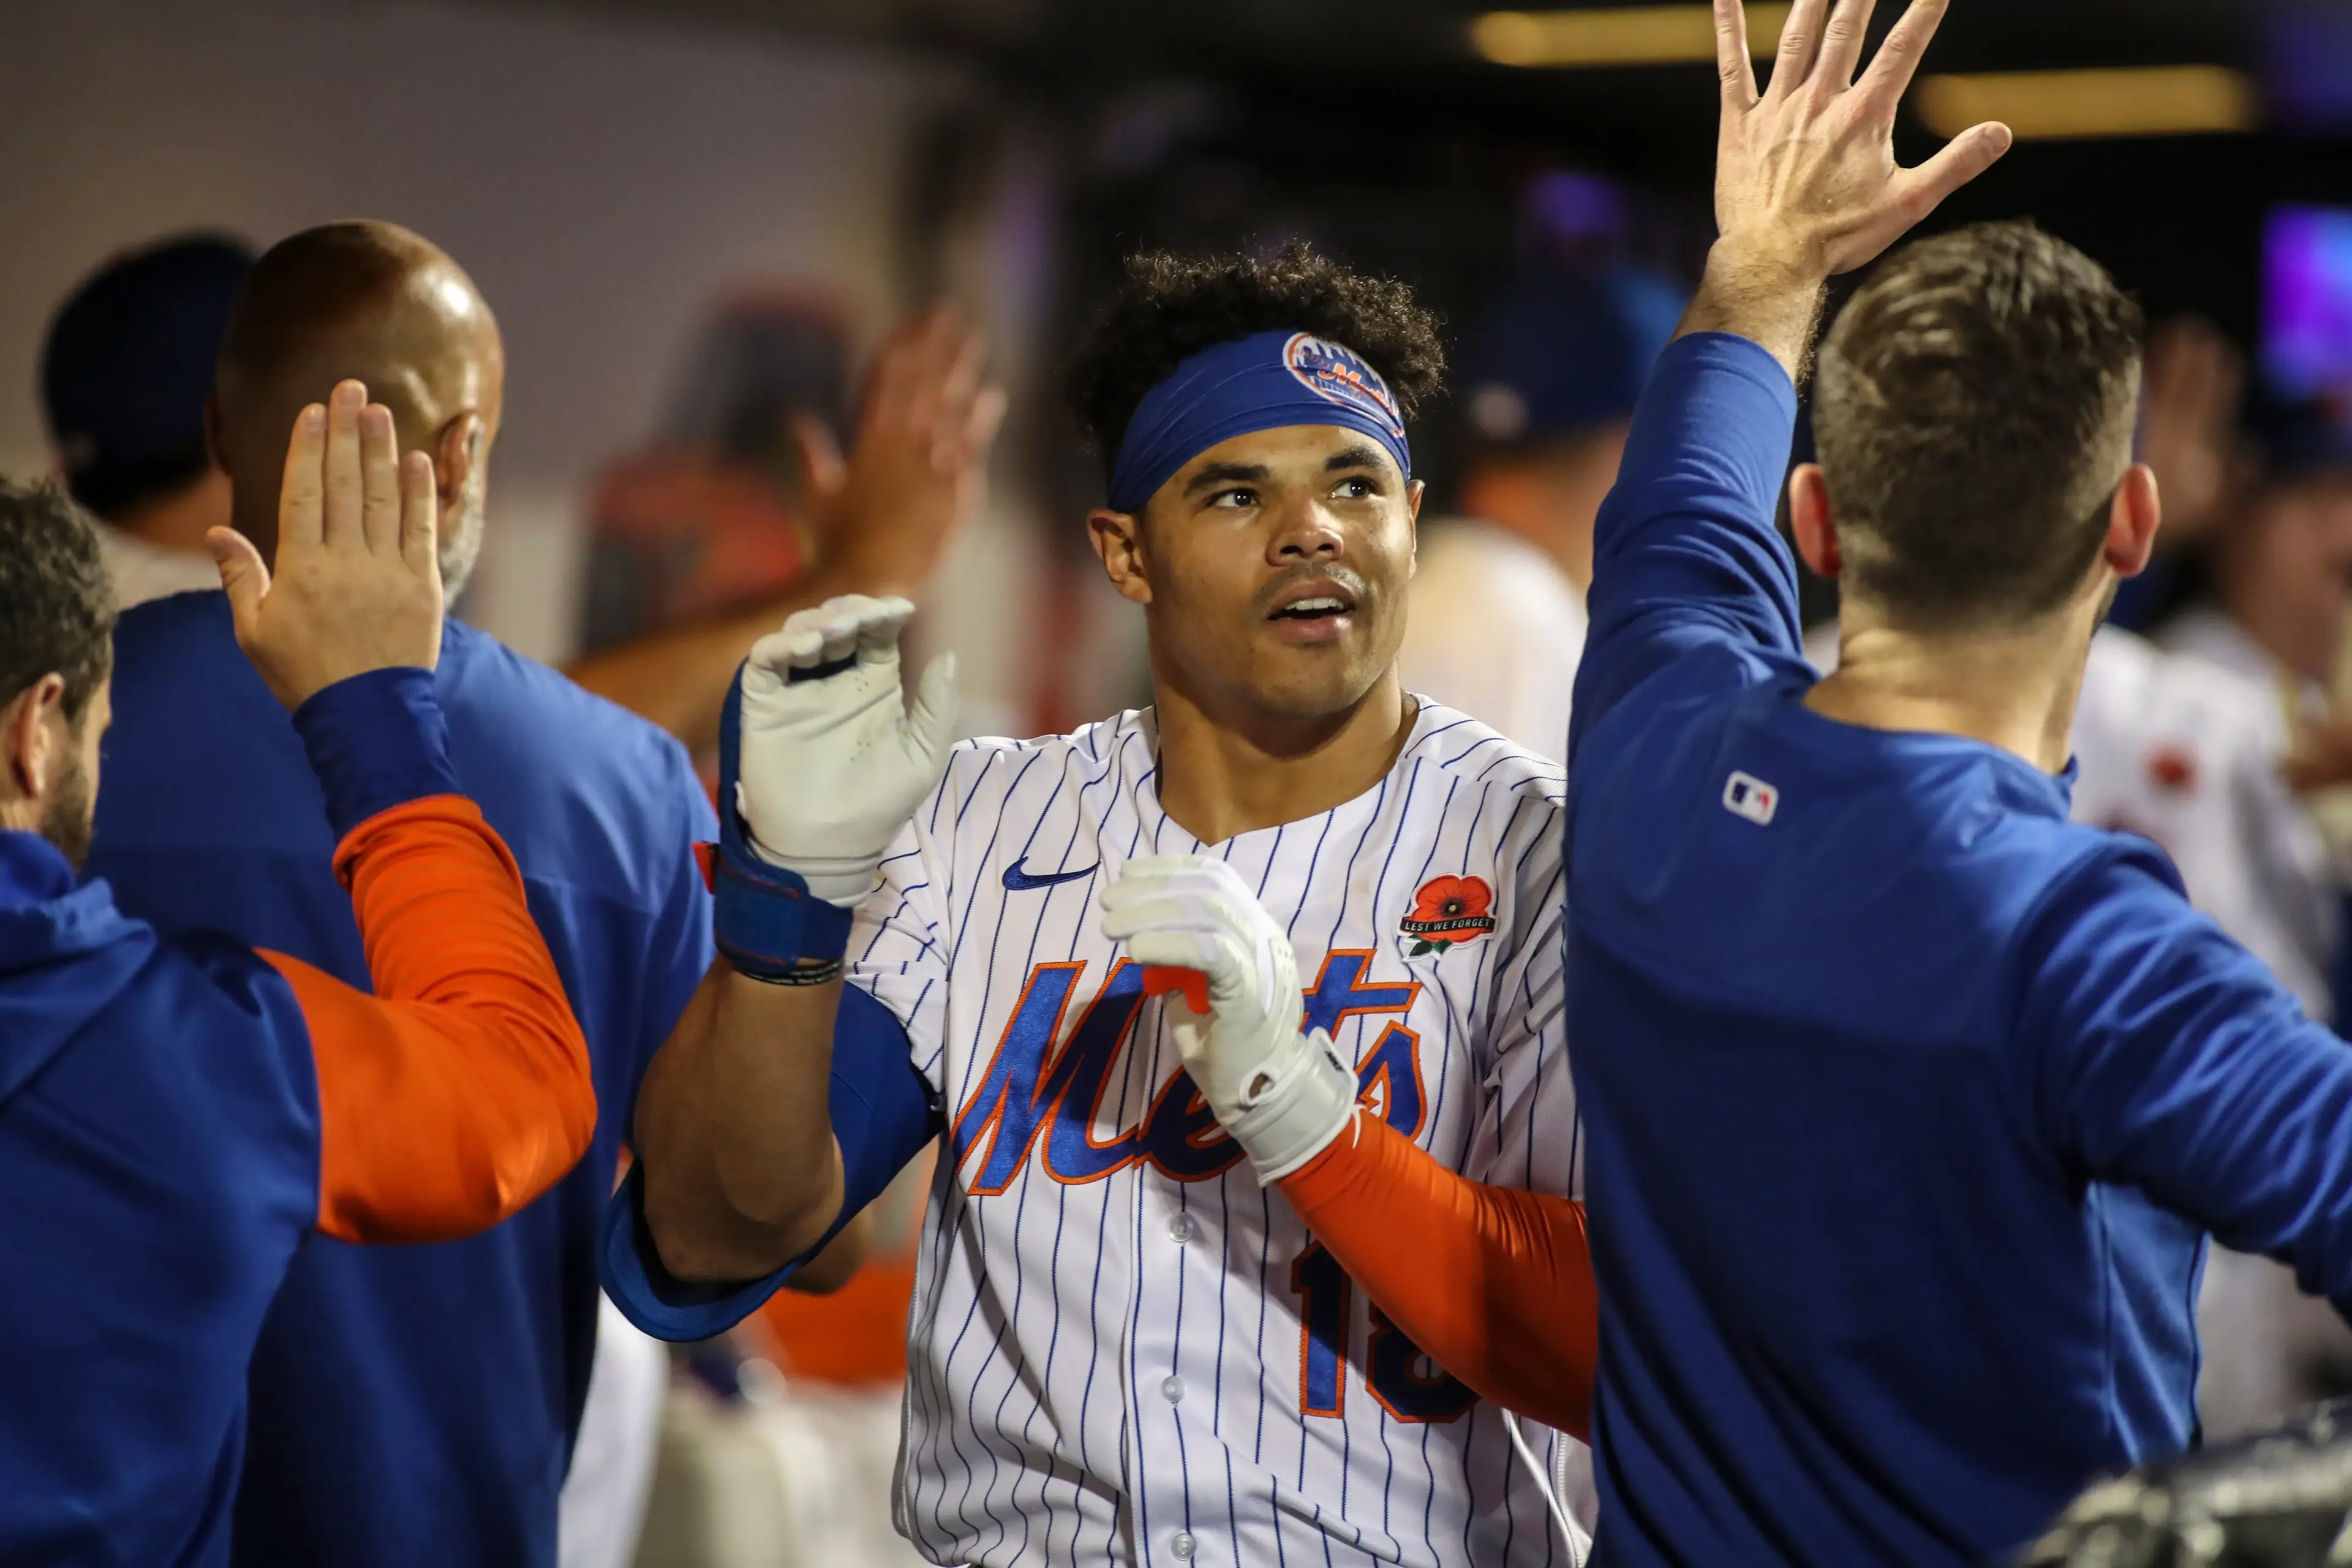 New York Mets left fielder Nick Plummer (18) is congratulated in the dugout after hitting a three-run home run in the fourth inning against the Washington Nationals at Citi Field. / Wendell Cruz-USA TODAY Sports